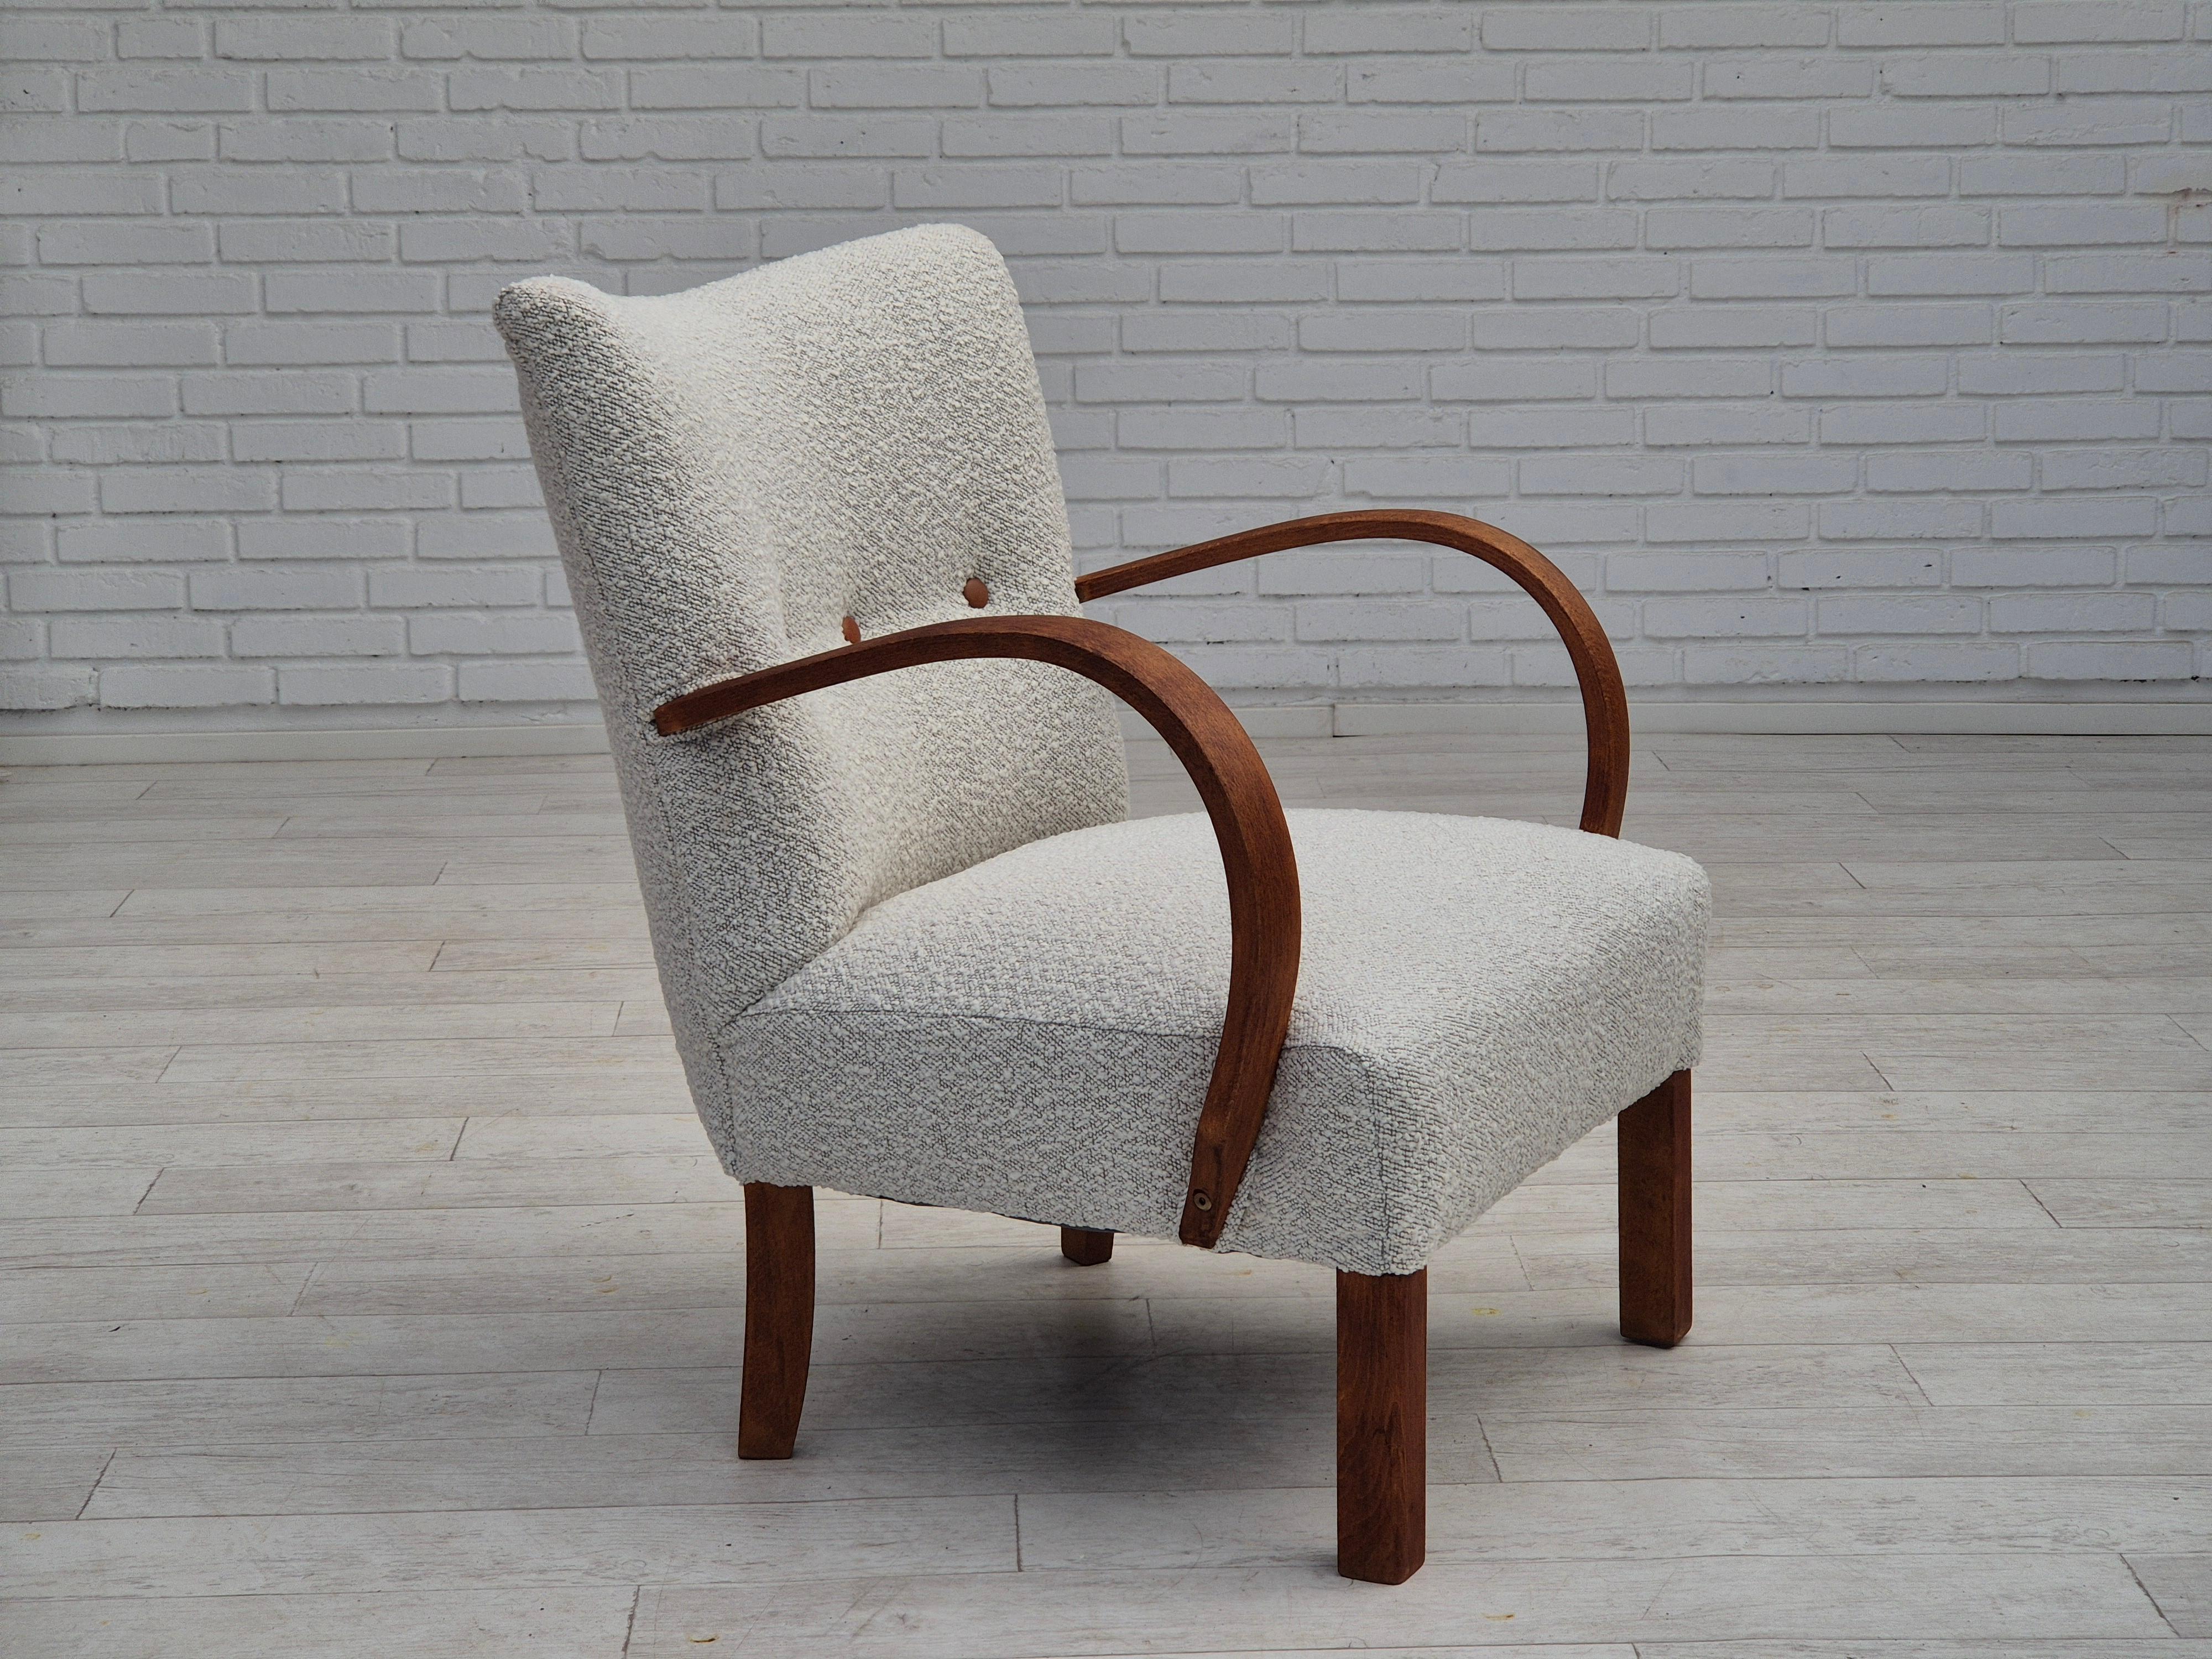 1960s, Danish art-deco armchair. Reupholstered in quality light grey/white furniture fabric, leather buttons. Renewed beech wood armrest and legs. Brass springs in the seat are retained. Reupholstered by professional upholsterer, craftsman.